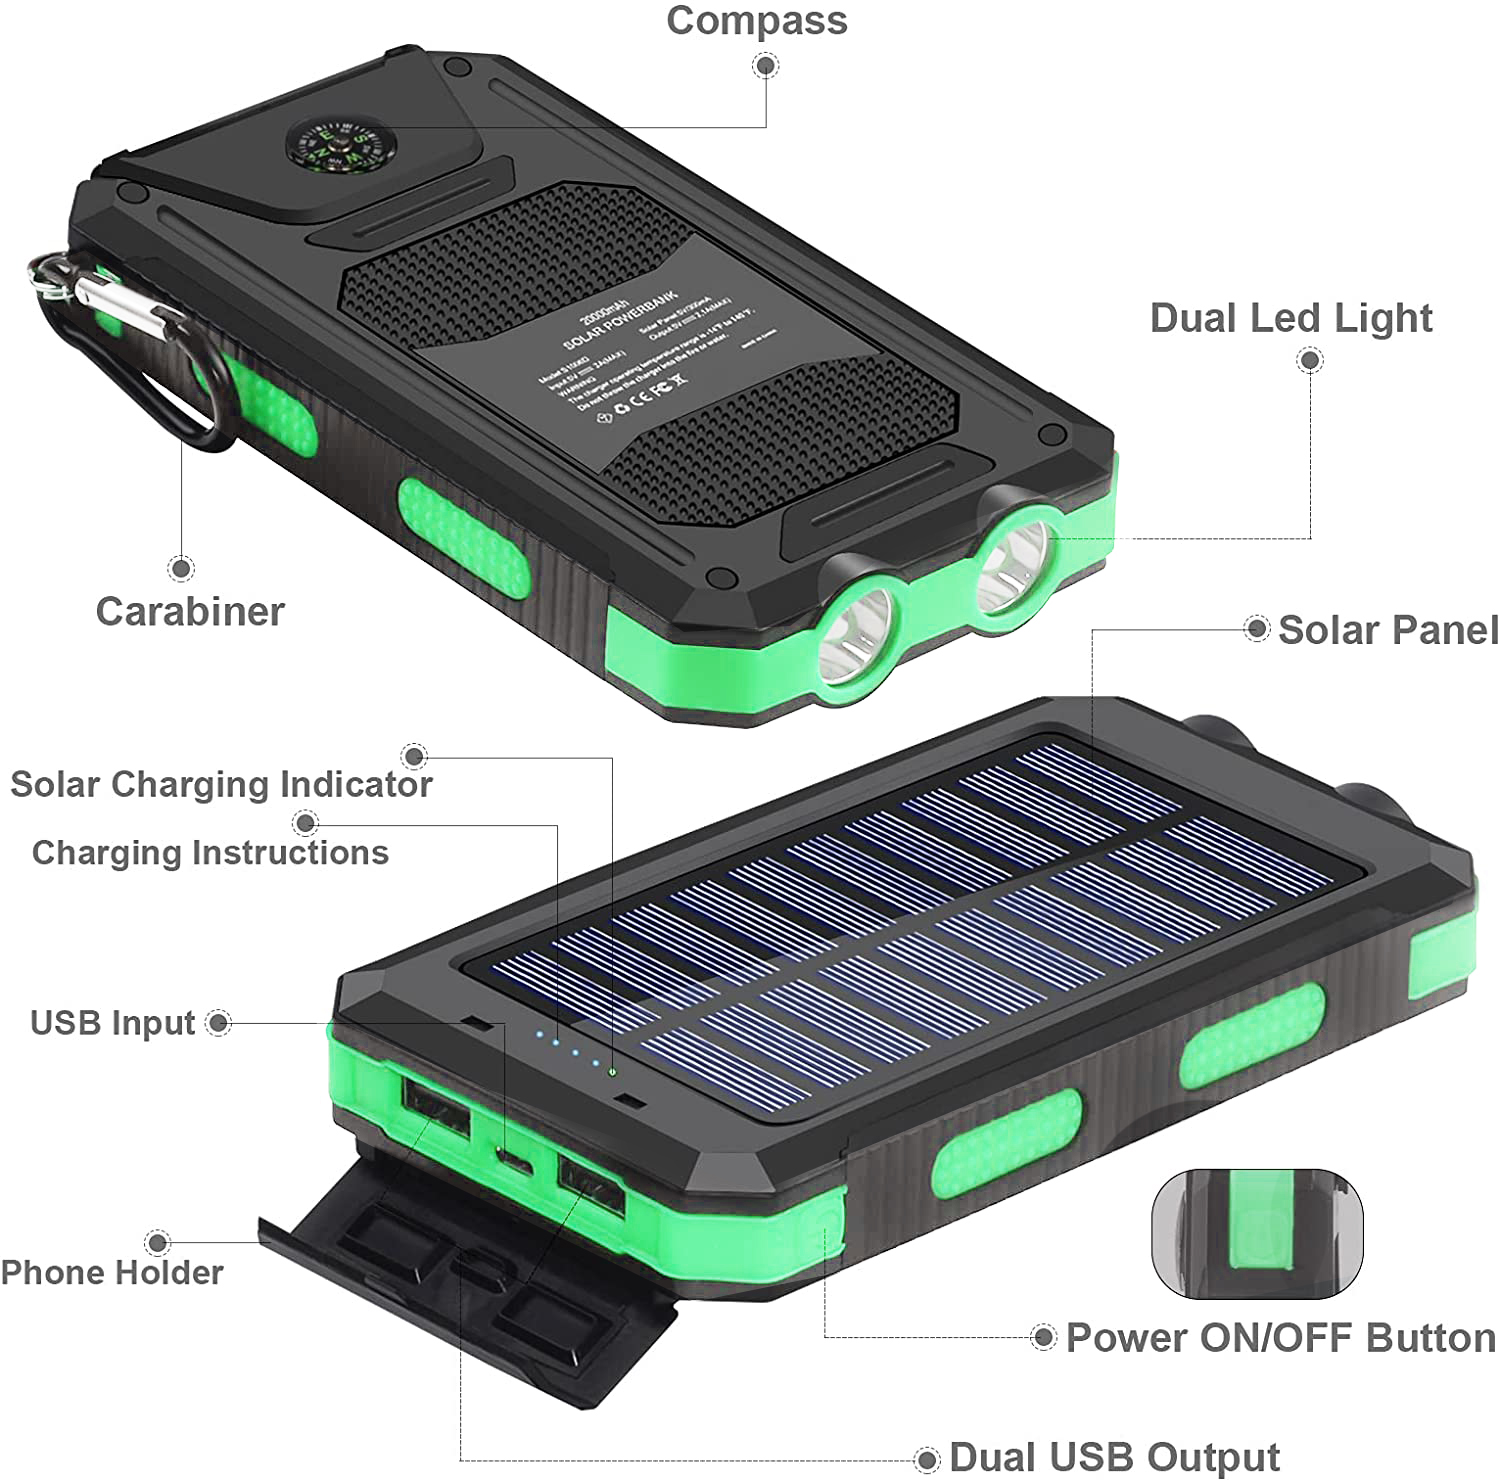 20000mAh Solar Charger for Cell Phone iphone, Portable Solar Power Bank with Dual 5V USB Ports, 2 Led Light Flashlight, Compass Battery Pack for Outdoor Camping Hiking(Green) - image 7 of 7